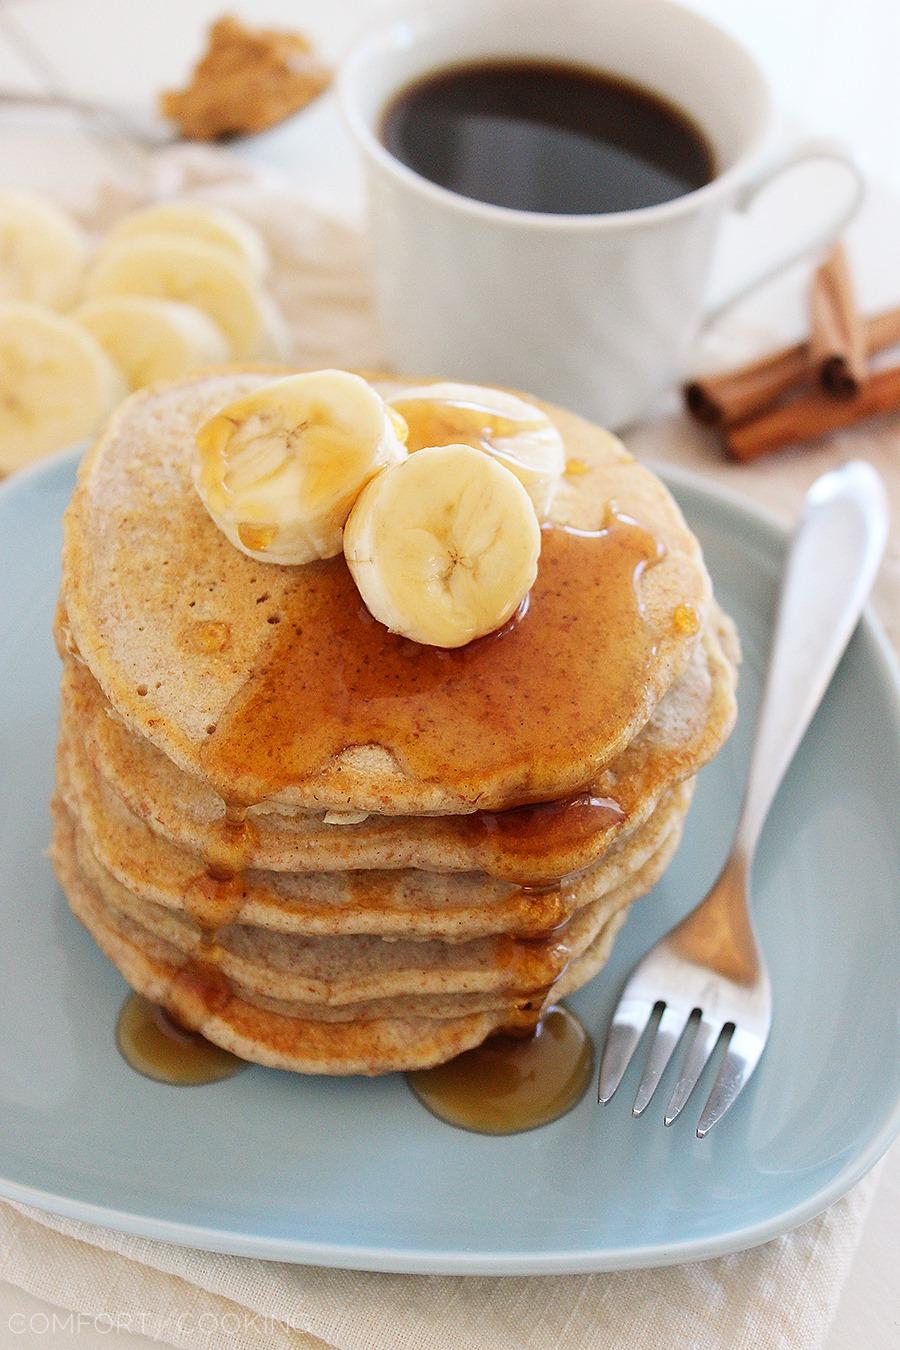 Whole Wheat Peanut Butter-Banana Pancakes – So soft & fluffy! Mix up the batter one day ahead and cook 'em up for a delish weekend morning treat!| thecomfortofcooking.com